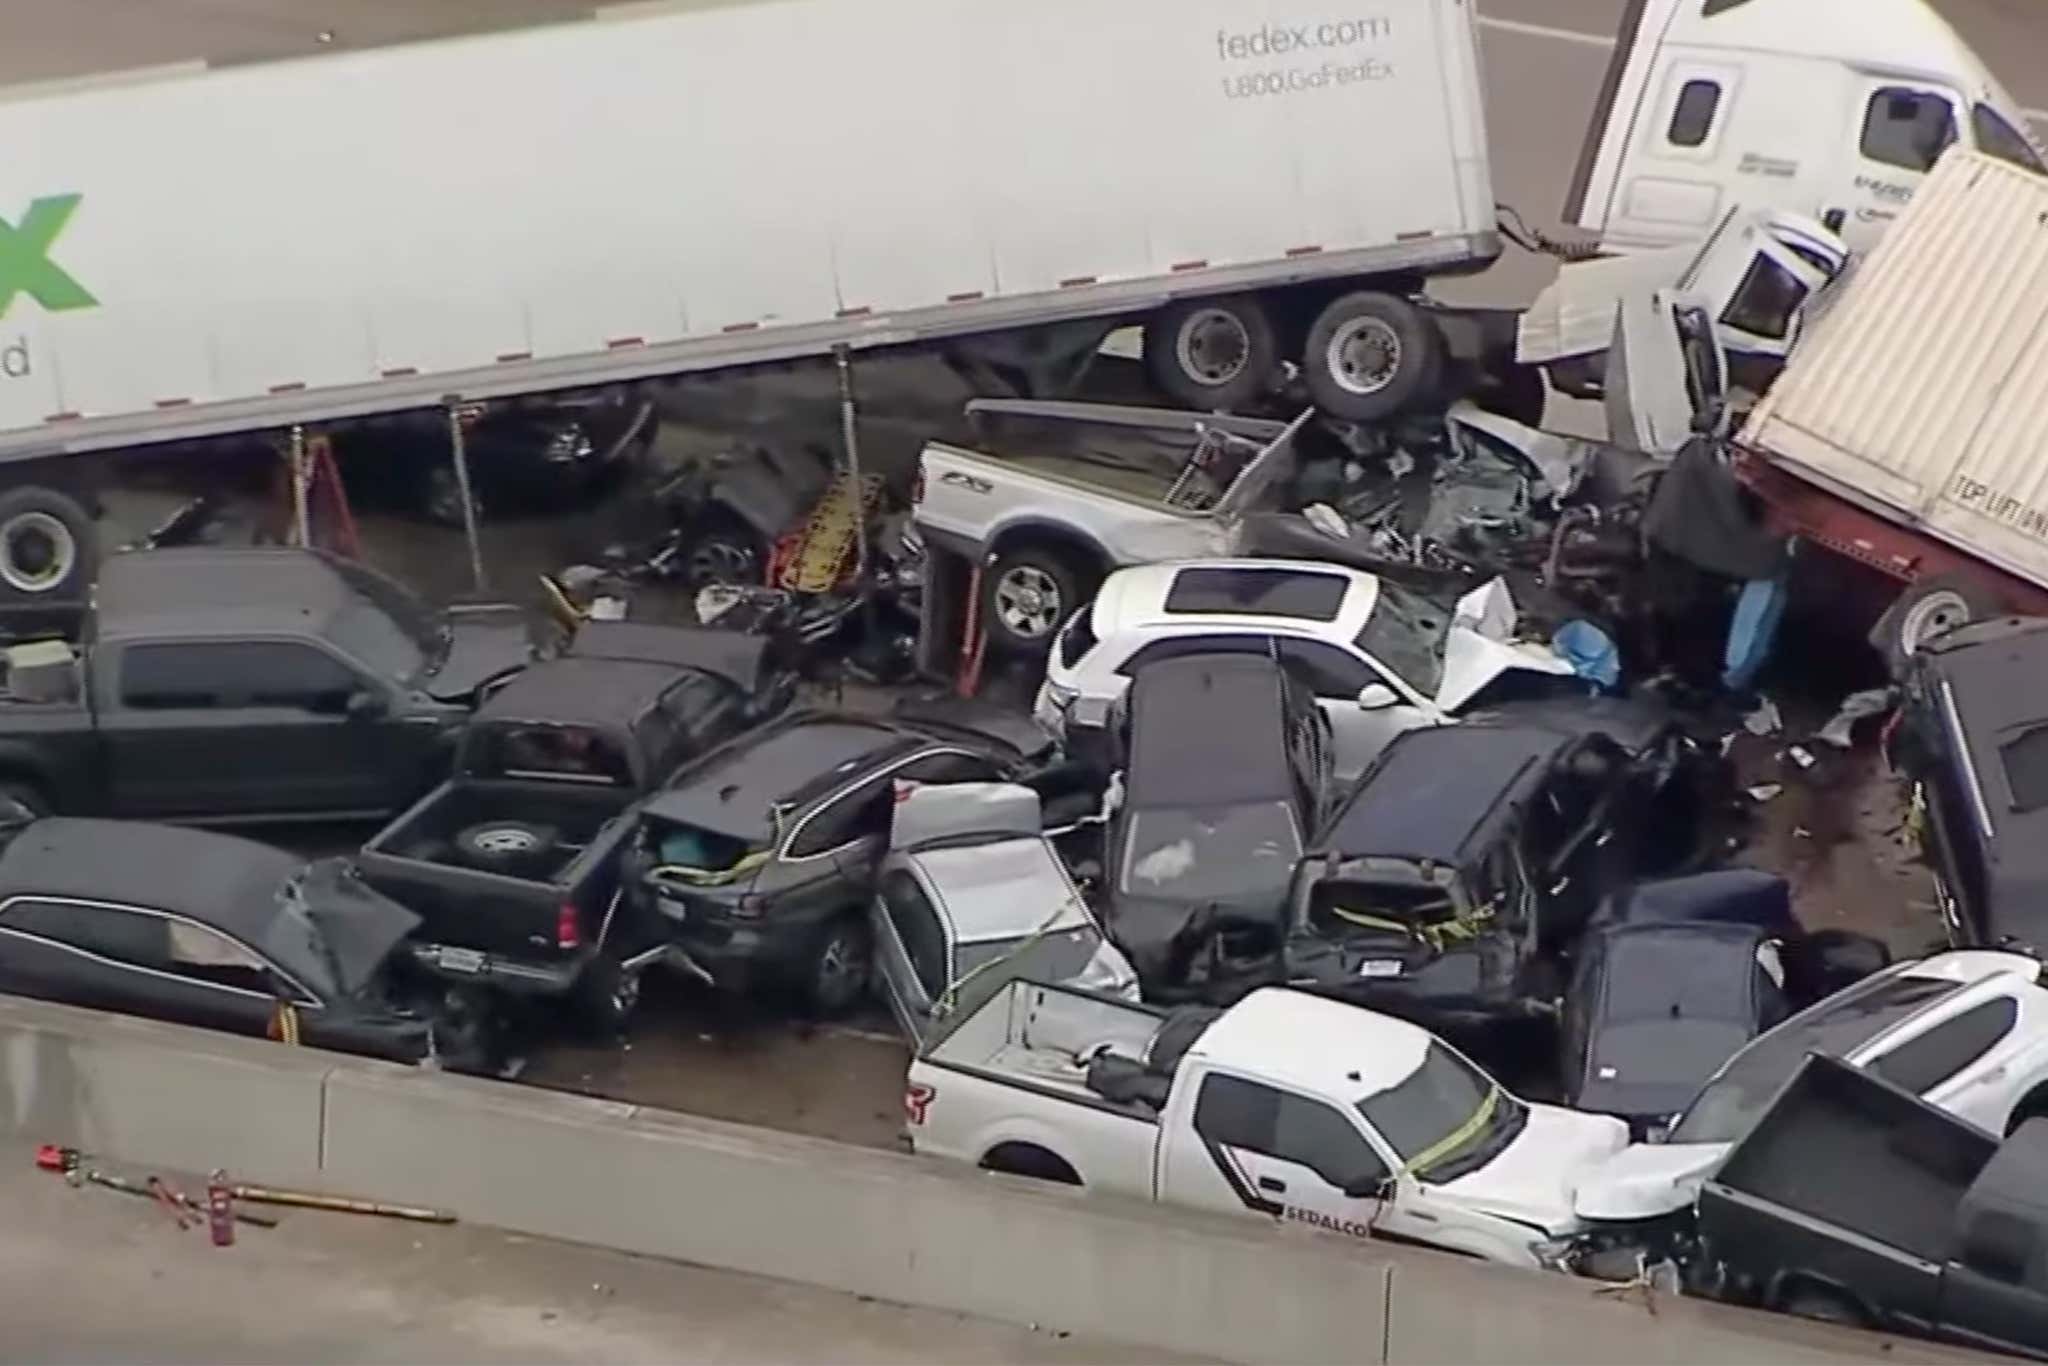 Horrifying Footage Shows 70-plus Vehicle Pile Up In Ft Worth That Killed At Least Five